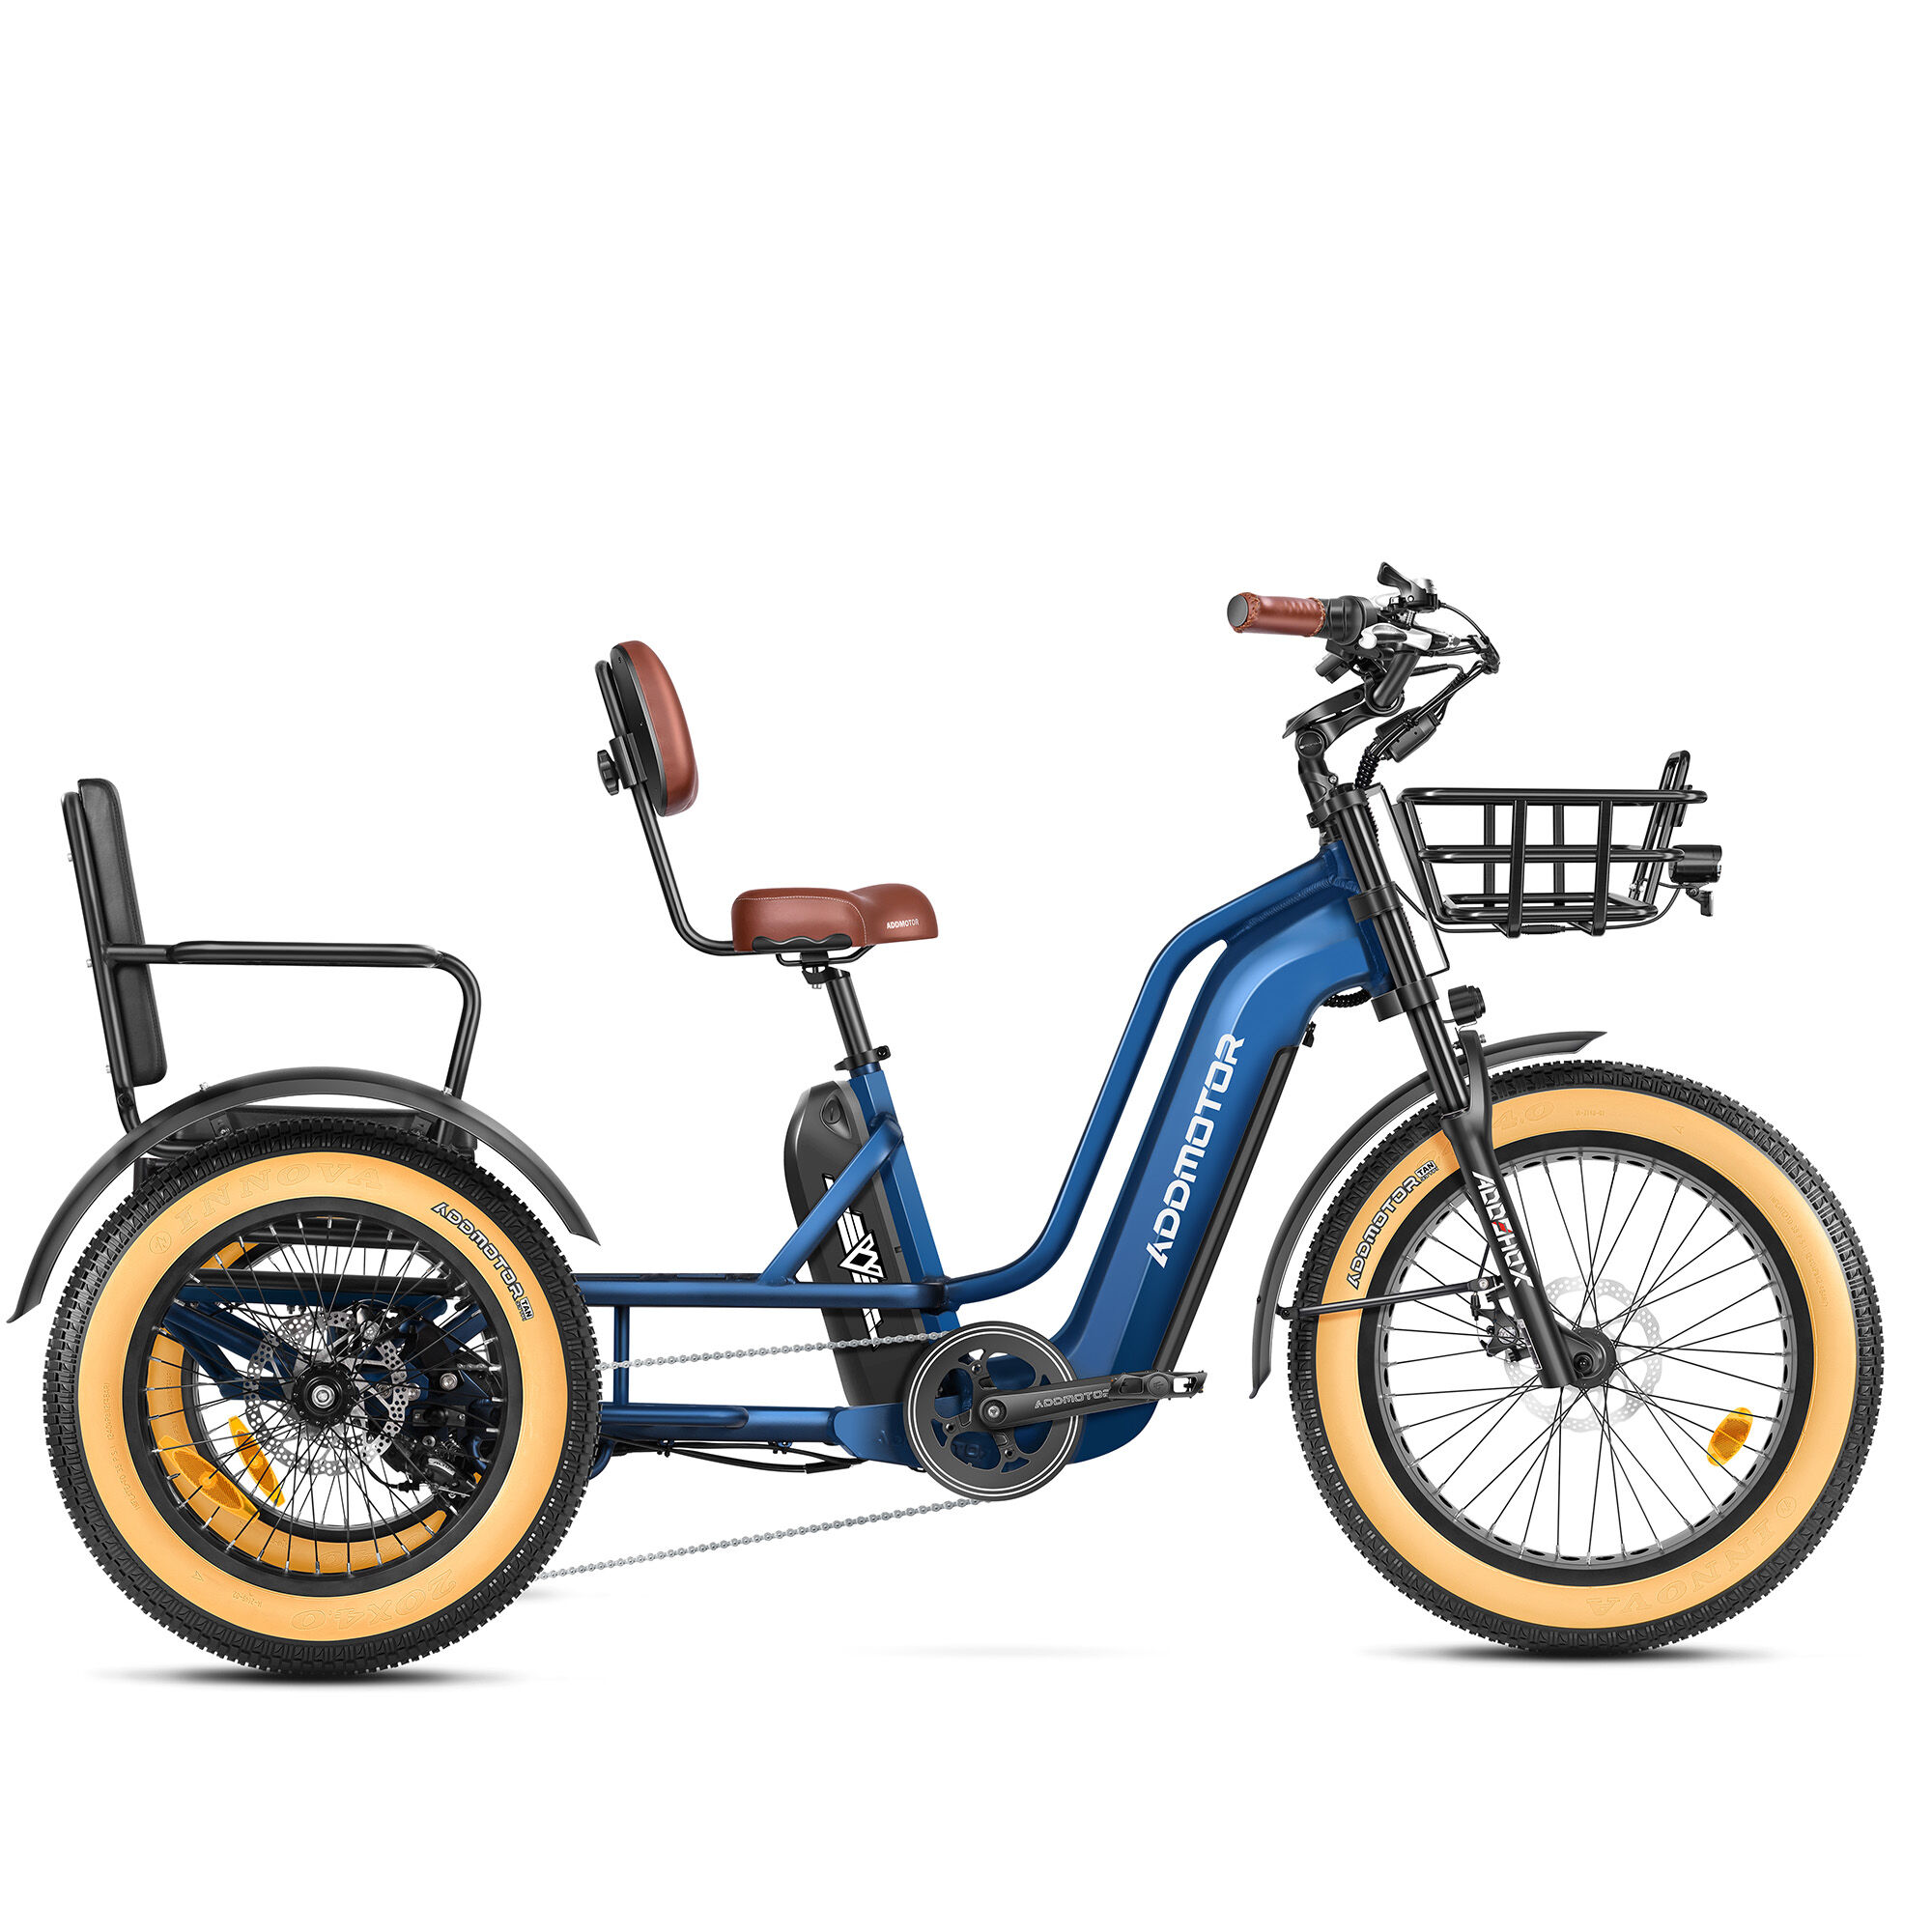 Addmotor Greattan L Dual-Battery Electric Trike with Passenger Seat   Fat Tire 750W Built-in Battery Design Electric Tricycle   Neptune Blue